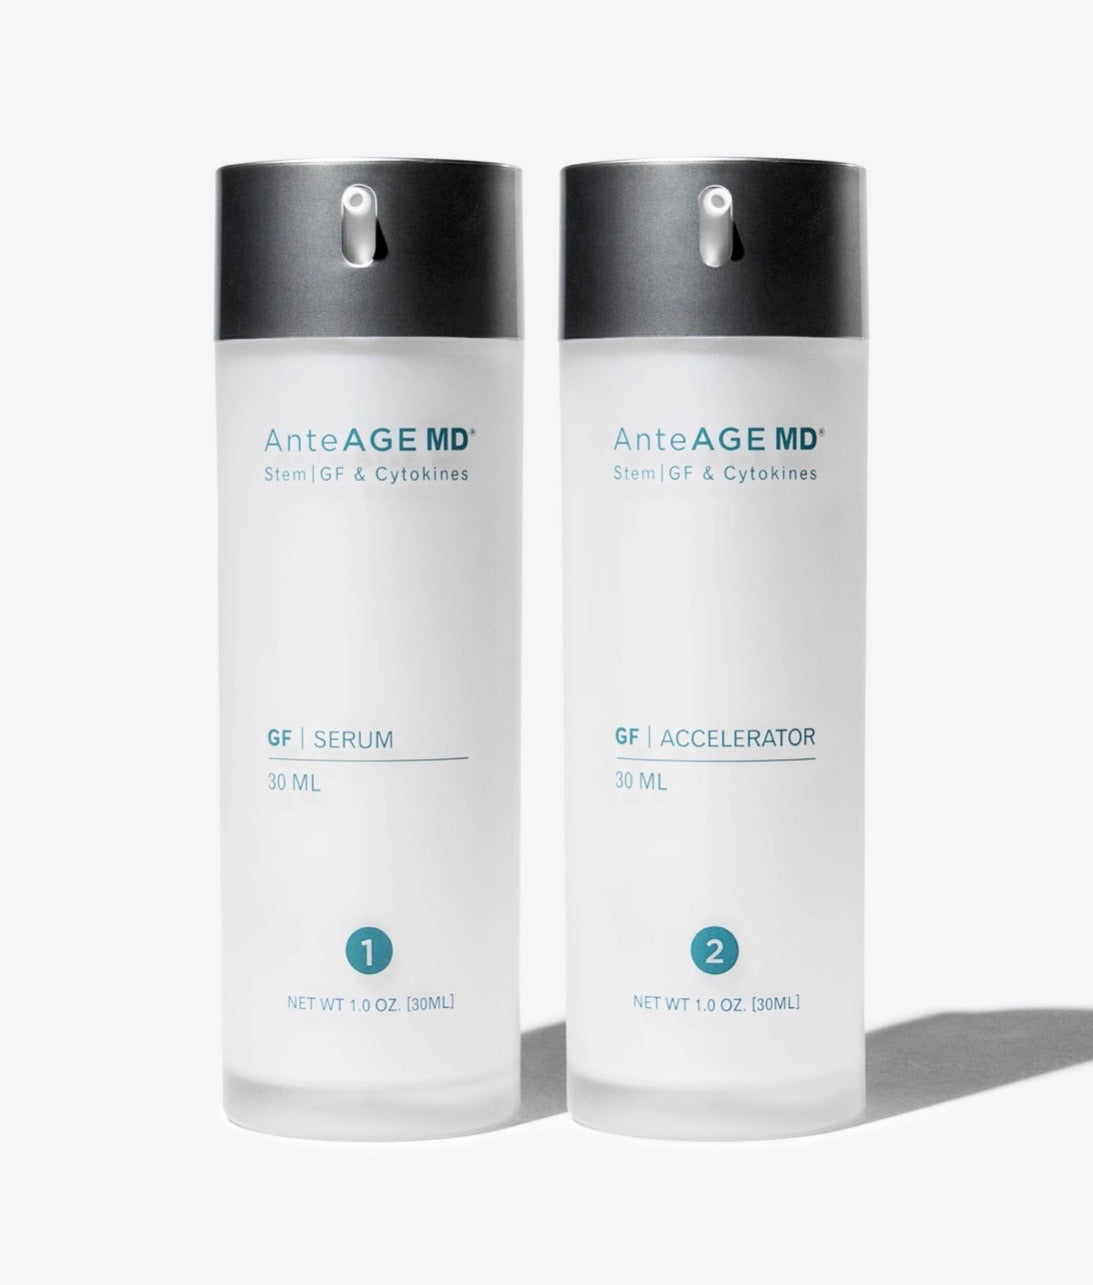 ANTEAGE MD System - The ultimate skincare solution with twice the Stem Cytokines, 21 additional anti-aging ingredients, and powerful pro-healing benefits